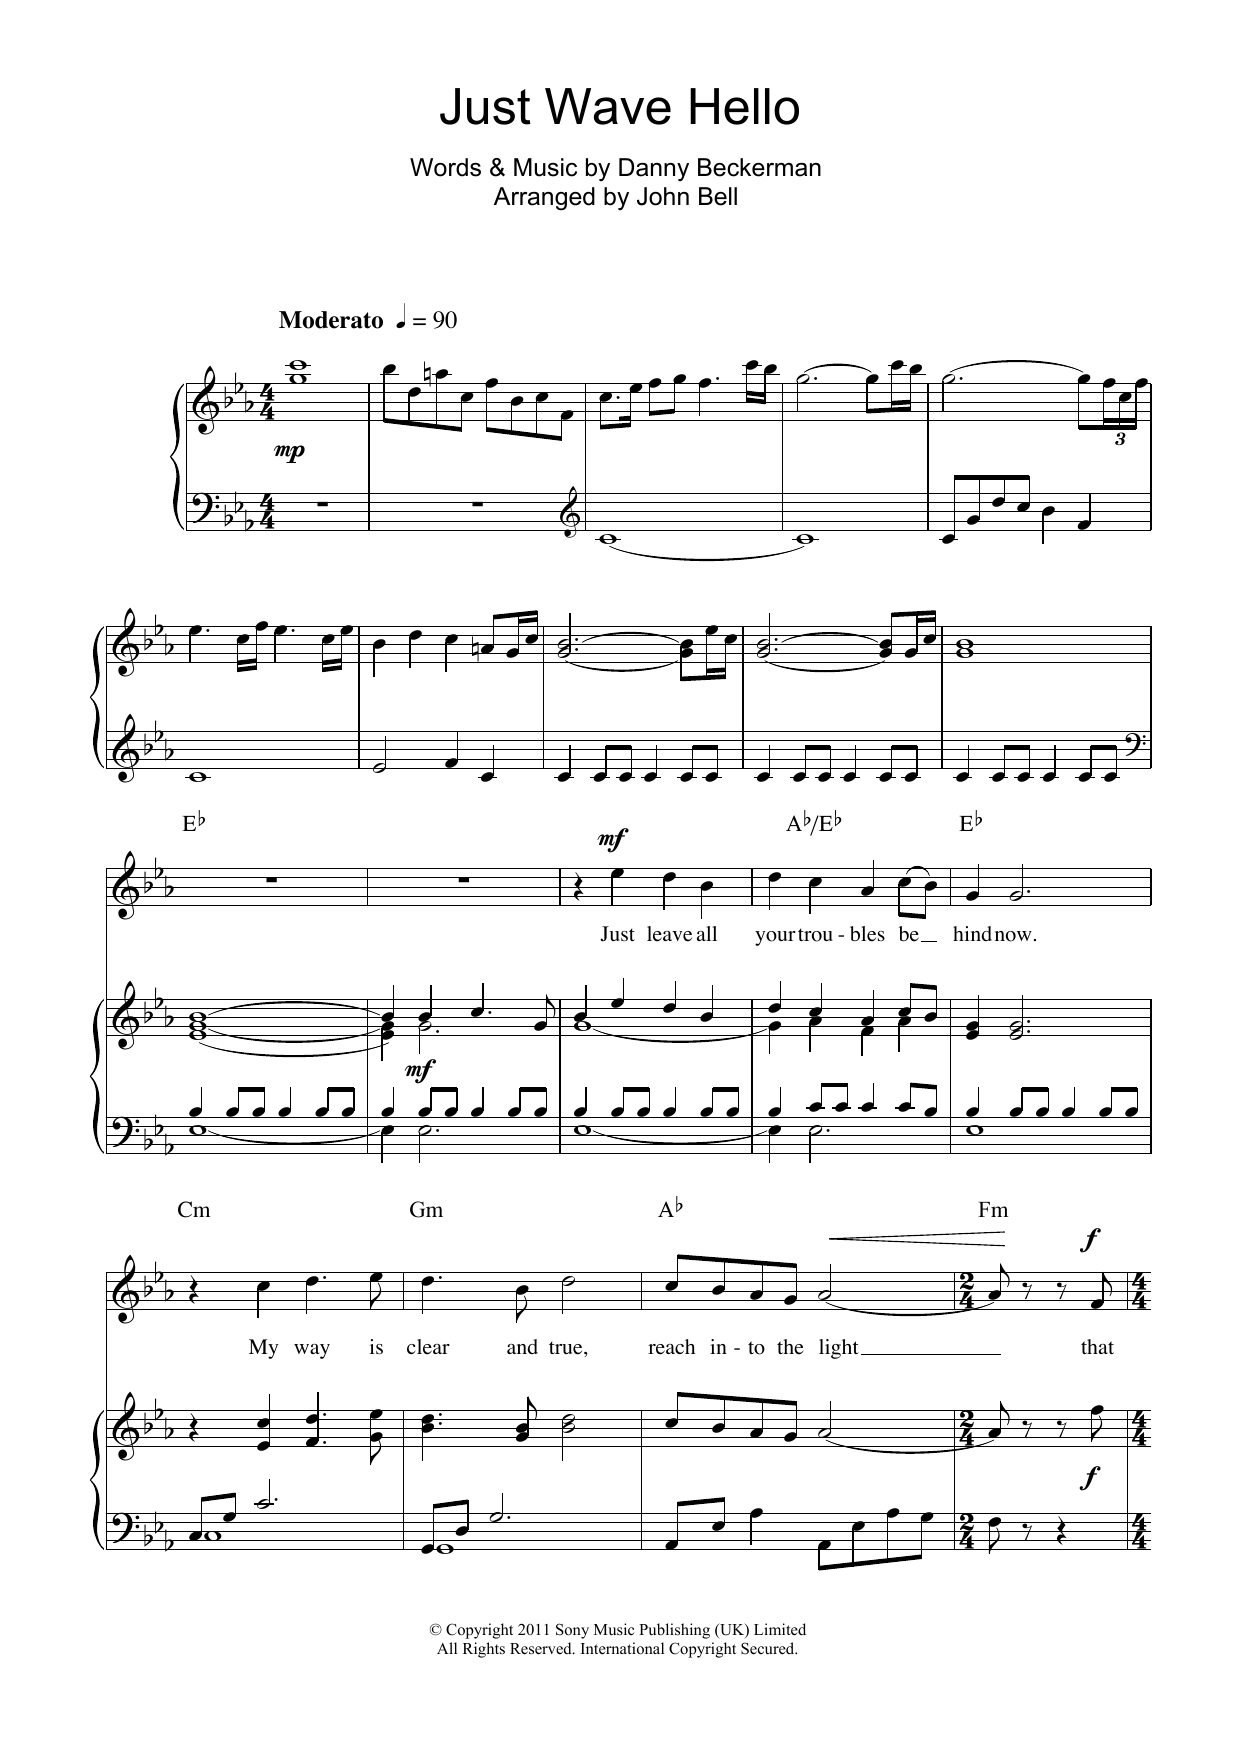 Just Wave Hello sheet music